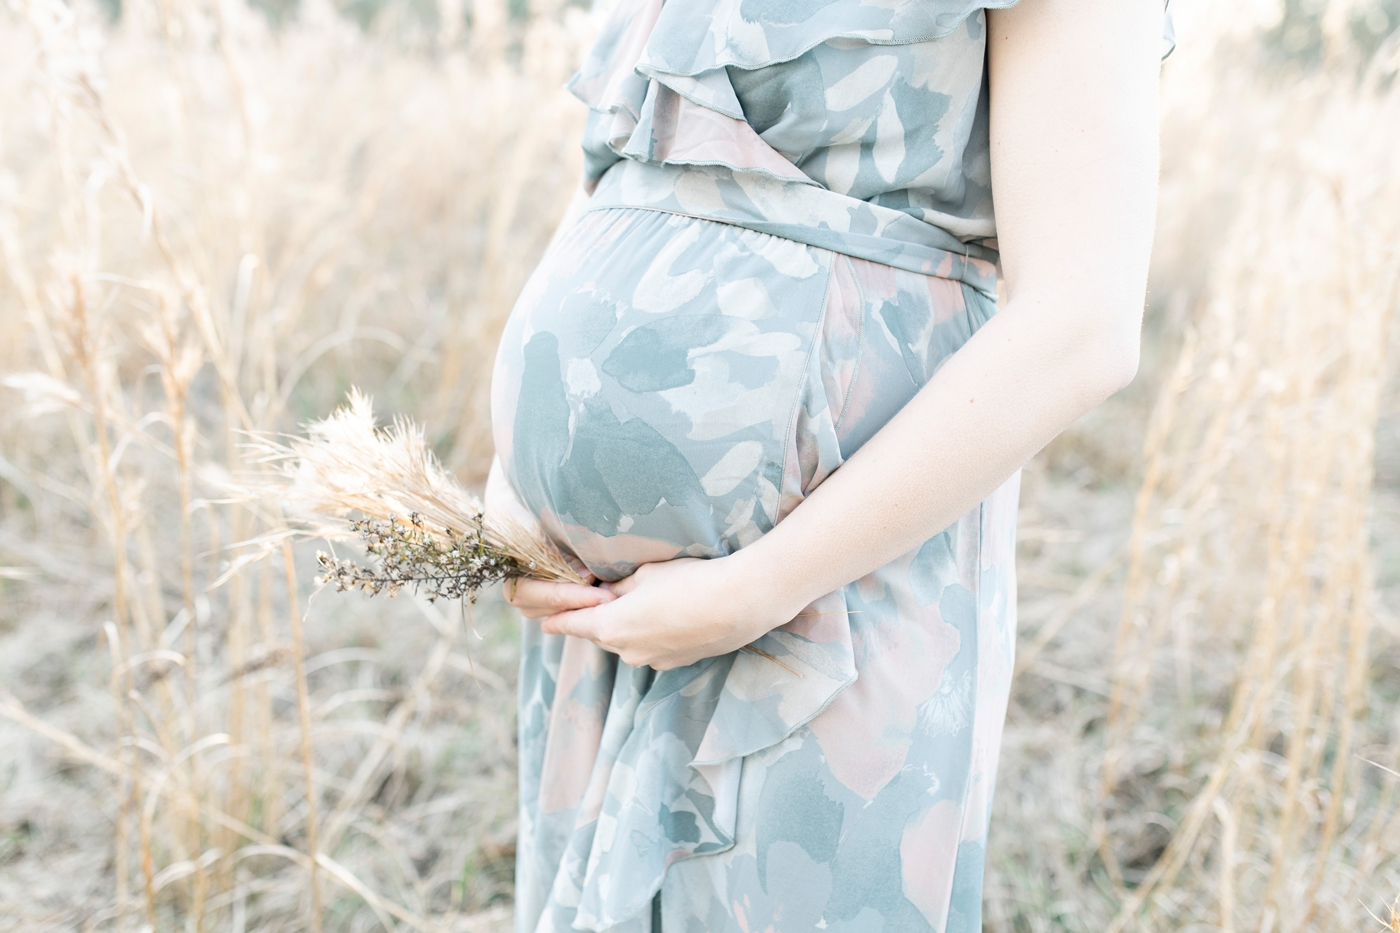 Maternity photoshoot in field. Photo by Little Sunshine Photography.